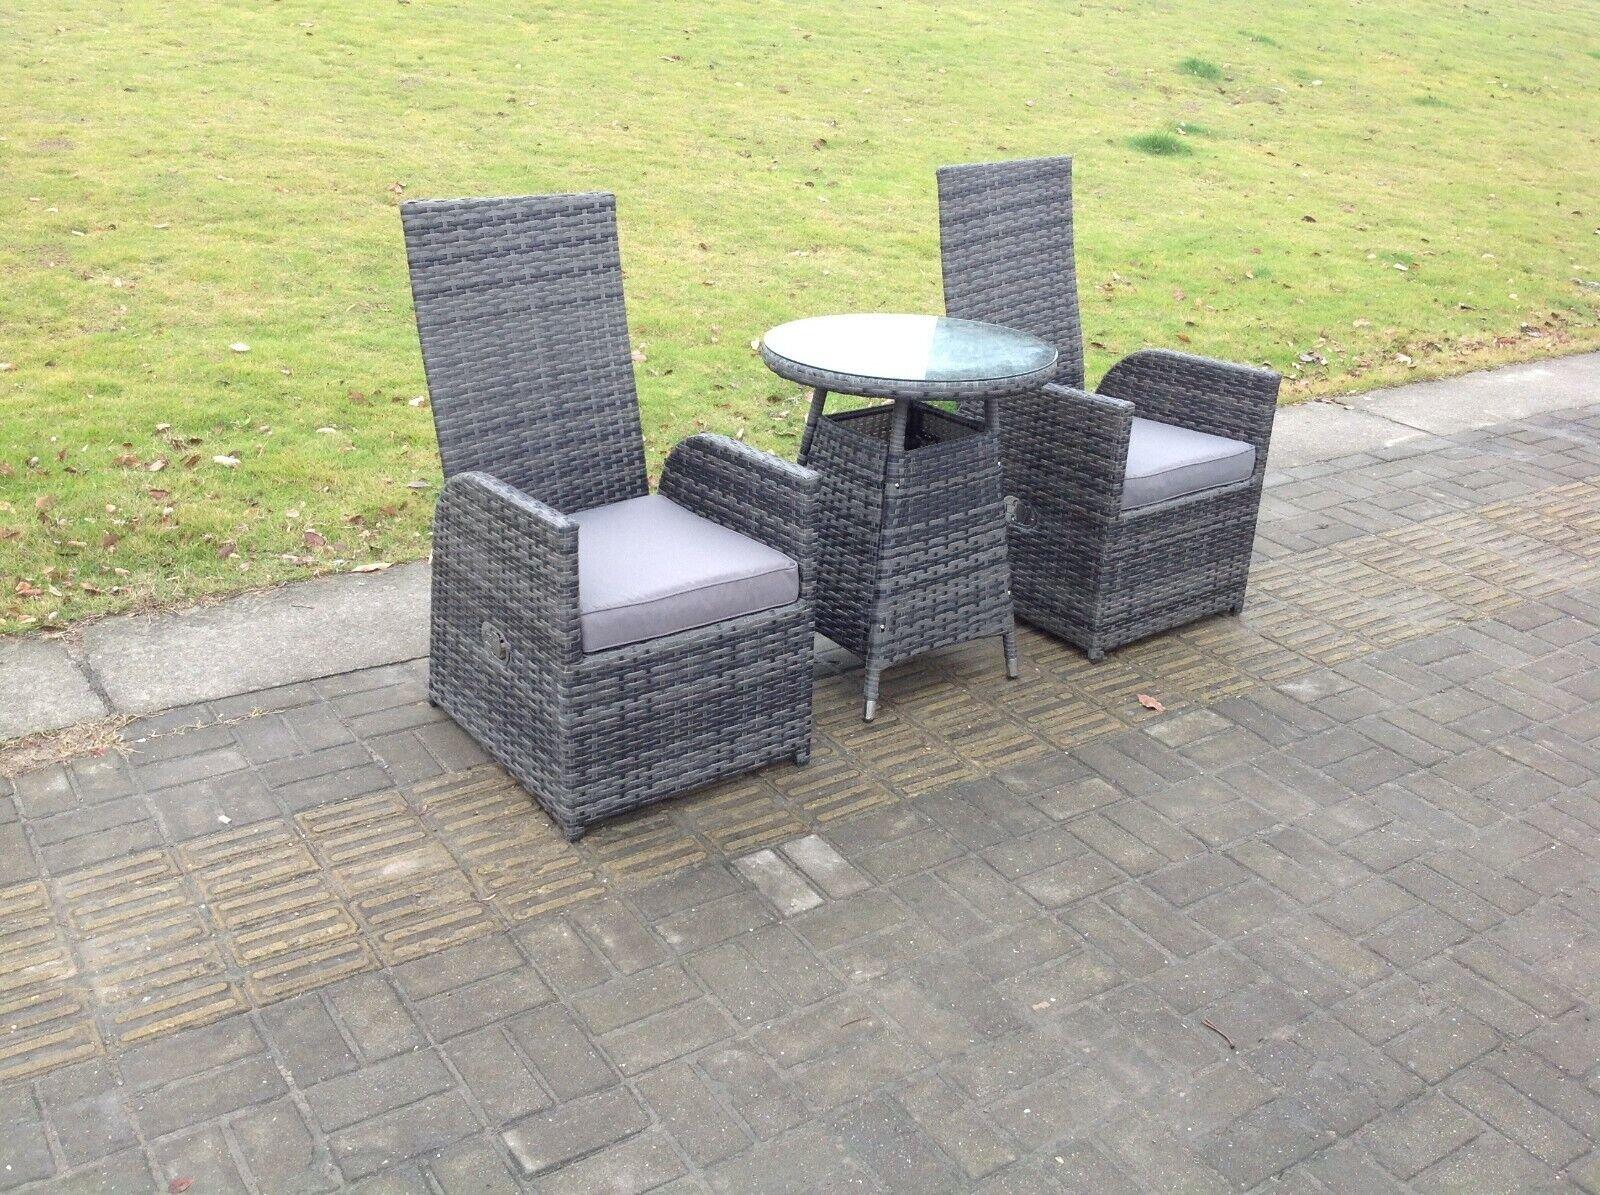 Outdoor Wicker Rattan Garden Furniture Reclining Chair And Table Dining Sets 2 Seater Bistro Round T